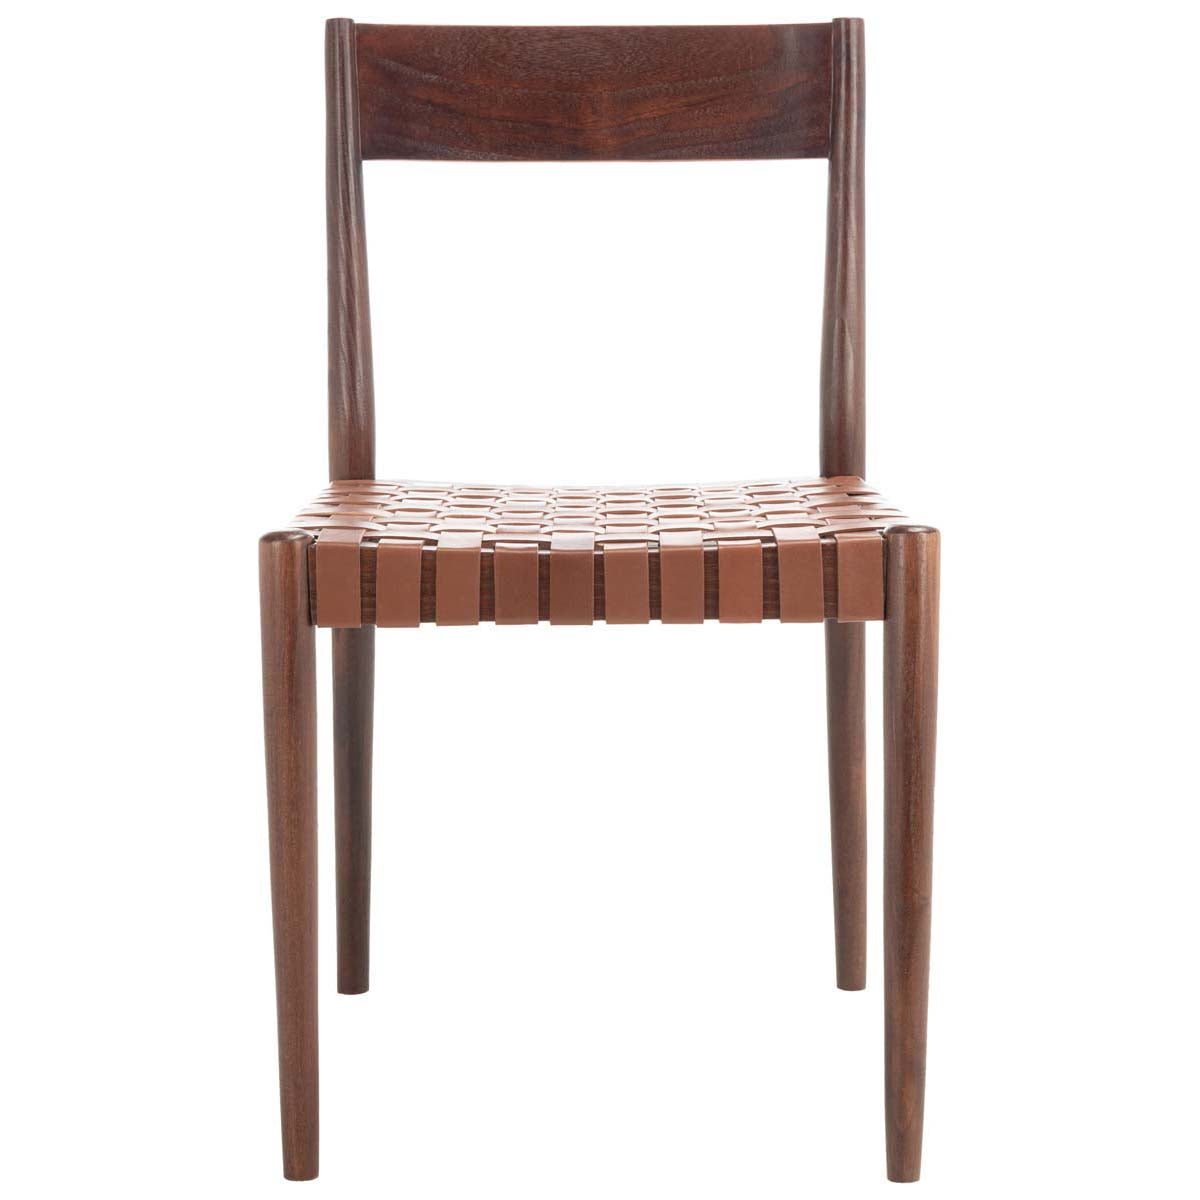 Safavieh Eluned Leather Dining Chair , DCH1201 - Cognac / Brown (Set of 2)